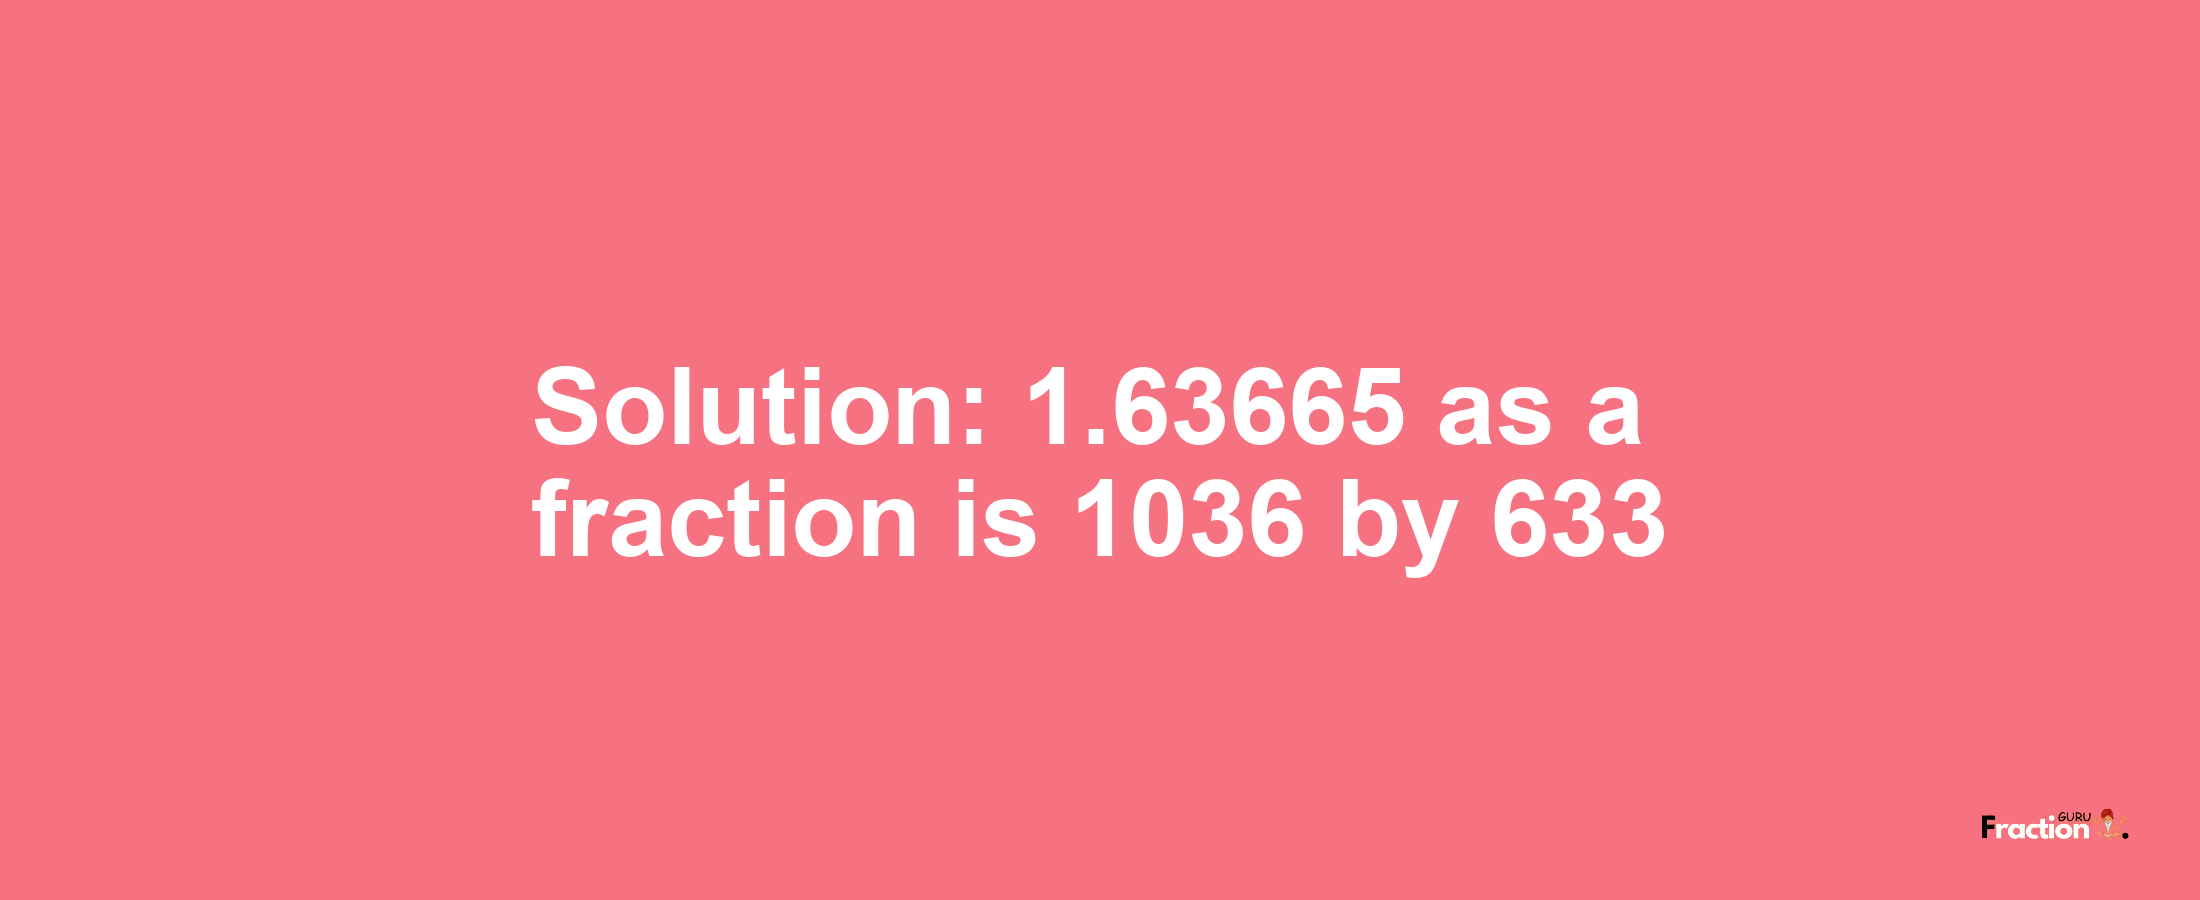 Solution:1.63665 as a fraction is 1036/633